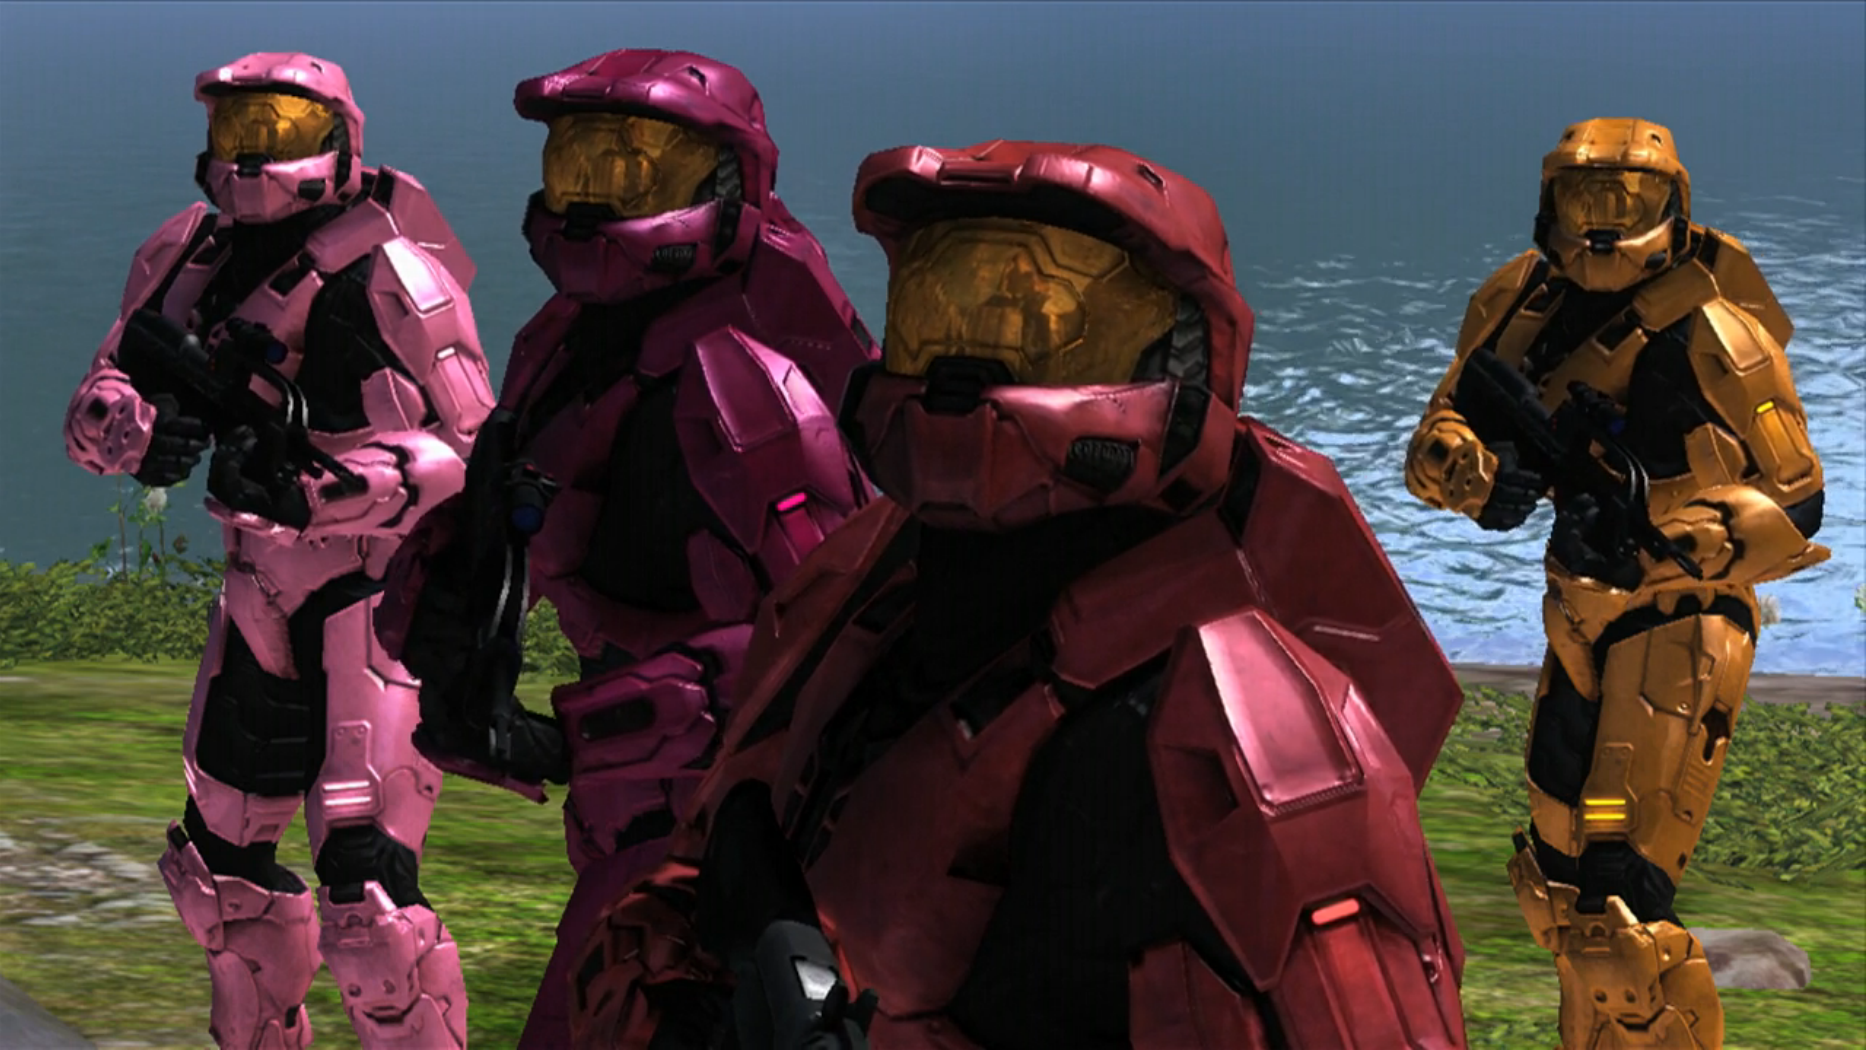 Rvb sigma - 🧡 Red vs Blue Doc Pretends to be Grif - YouTube.